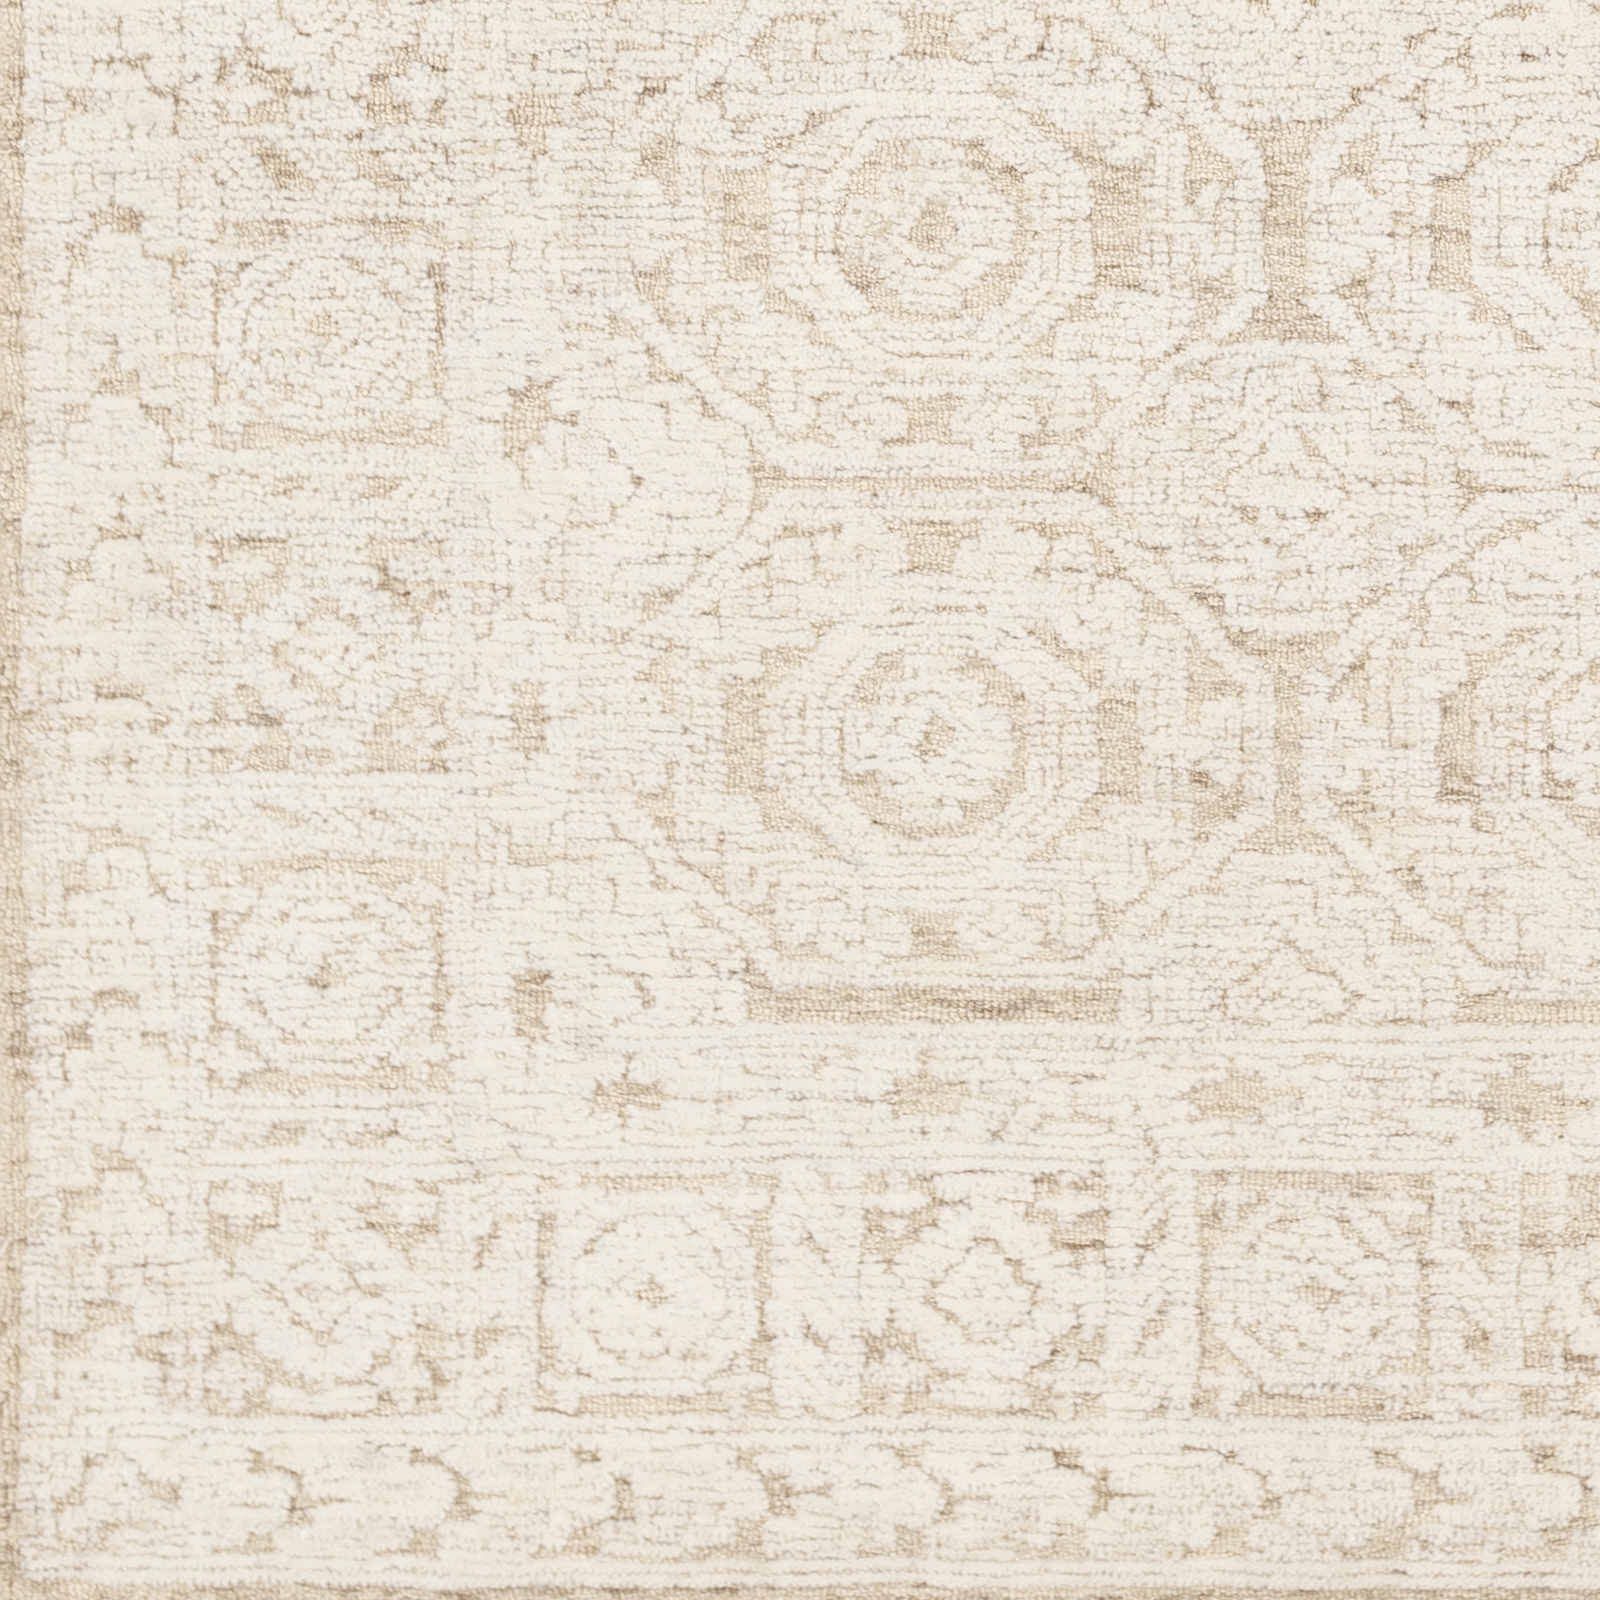 Louvre Rug, 4' x 6' - Image 2